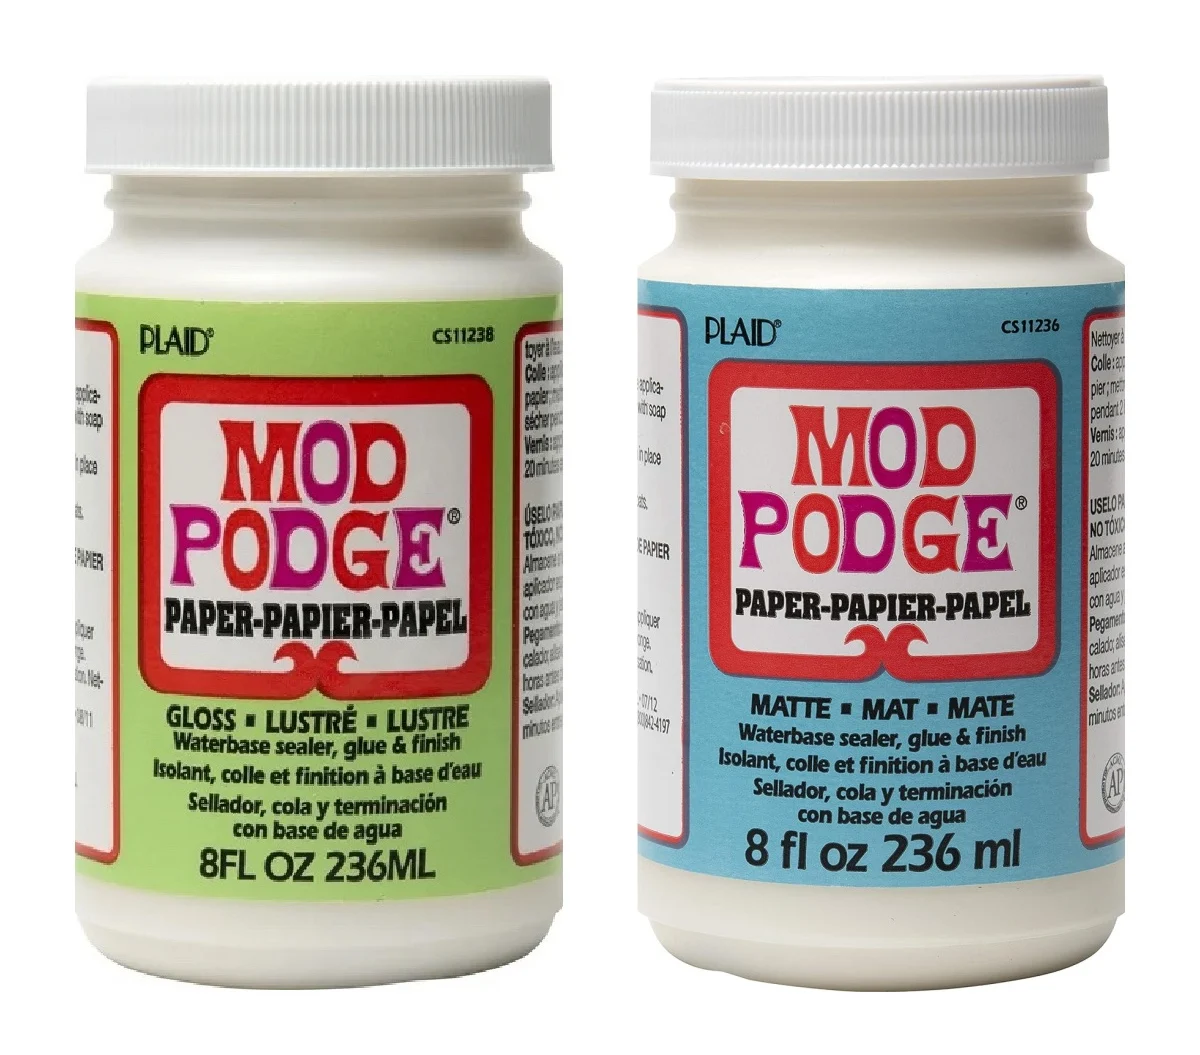 Does Mod Podge Dry Clear? Find Out Here! - Mod Podge Rocks